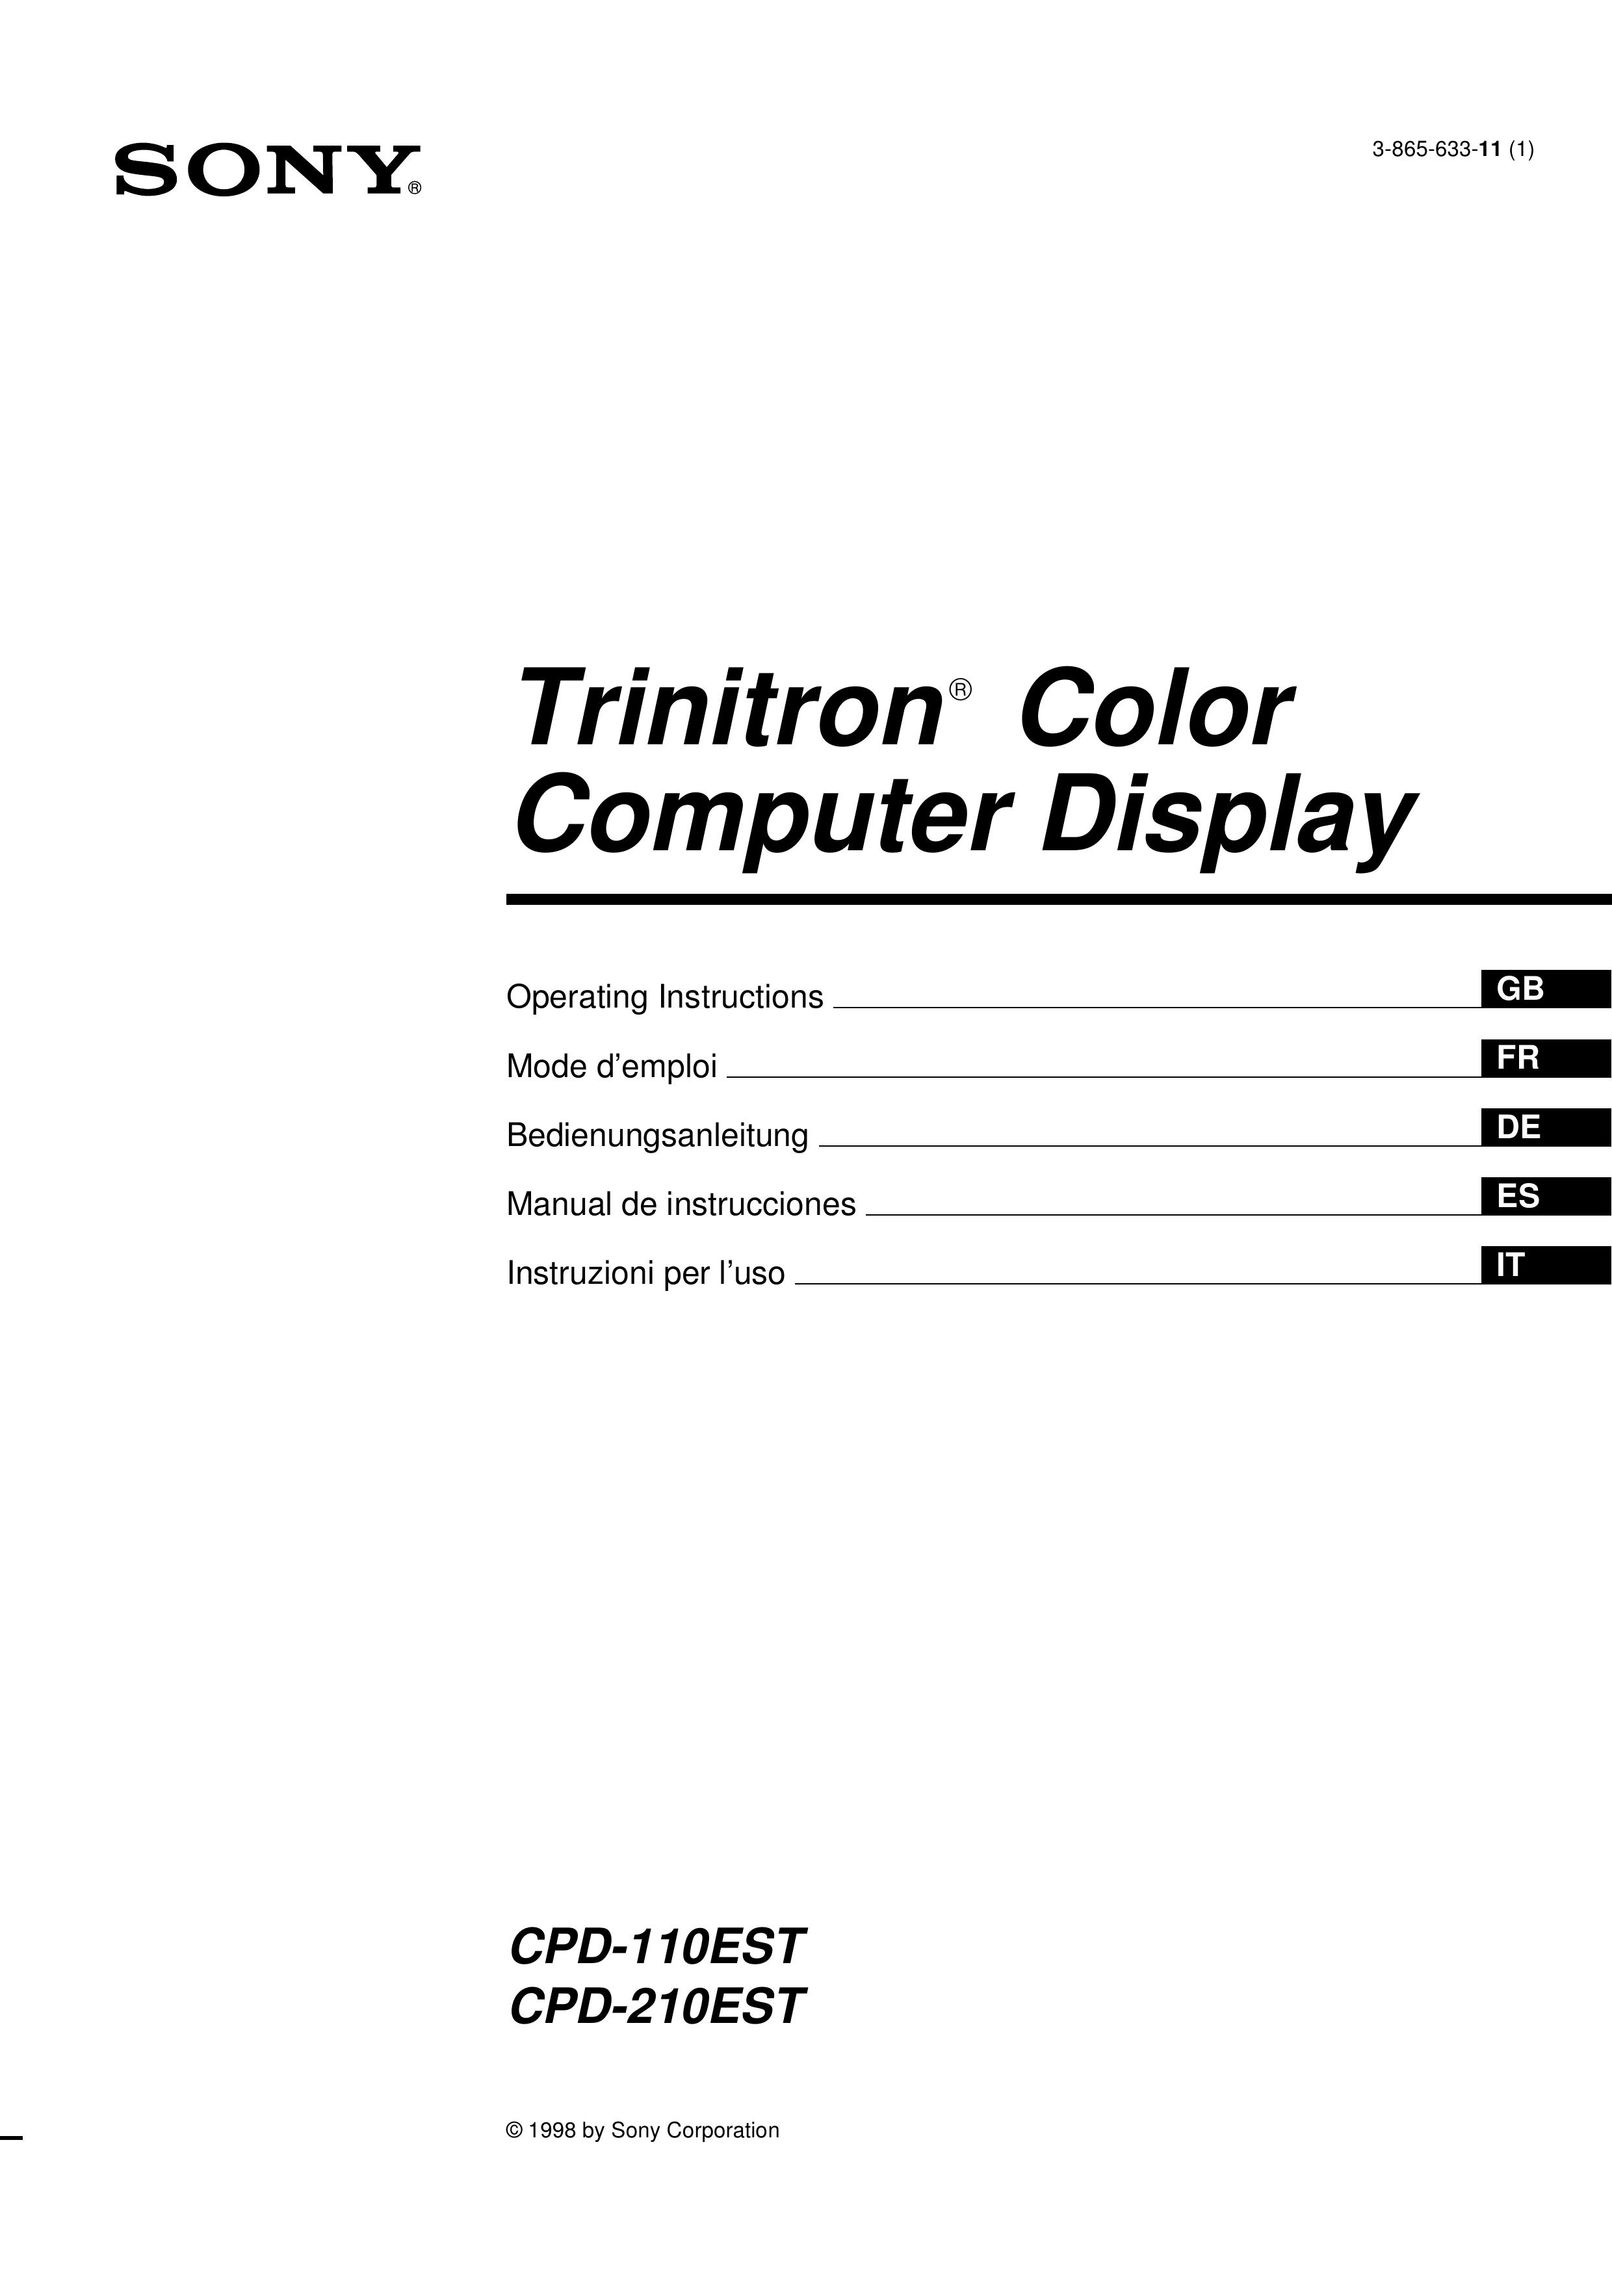 Sony CPD-210EST Computer Monitor User Manual